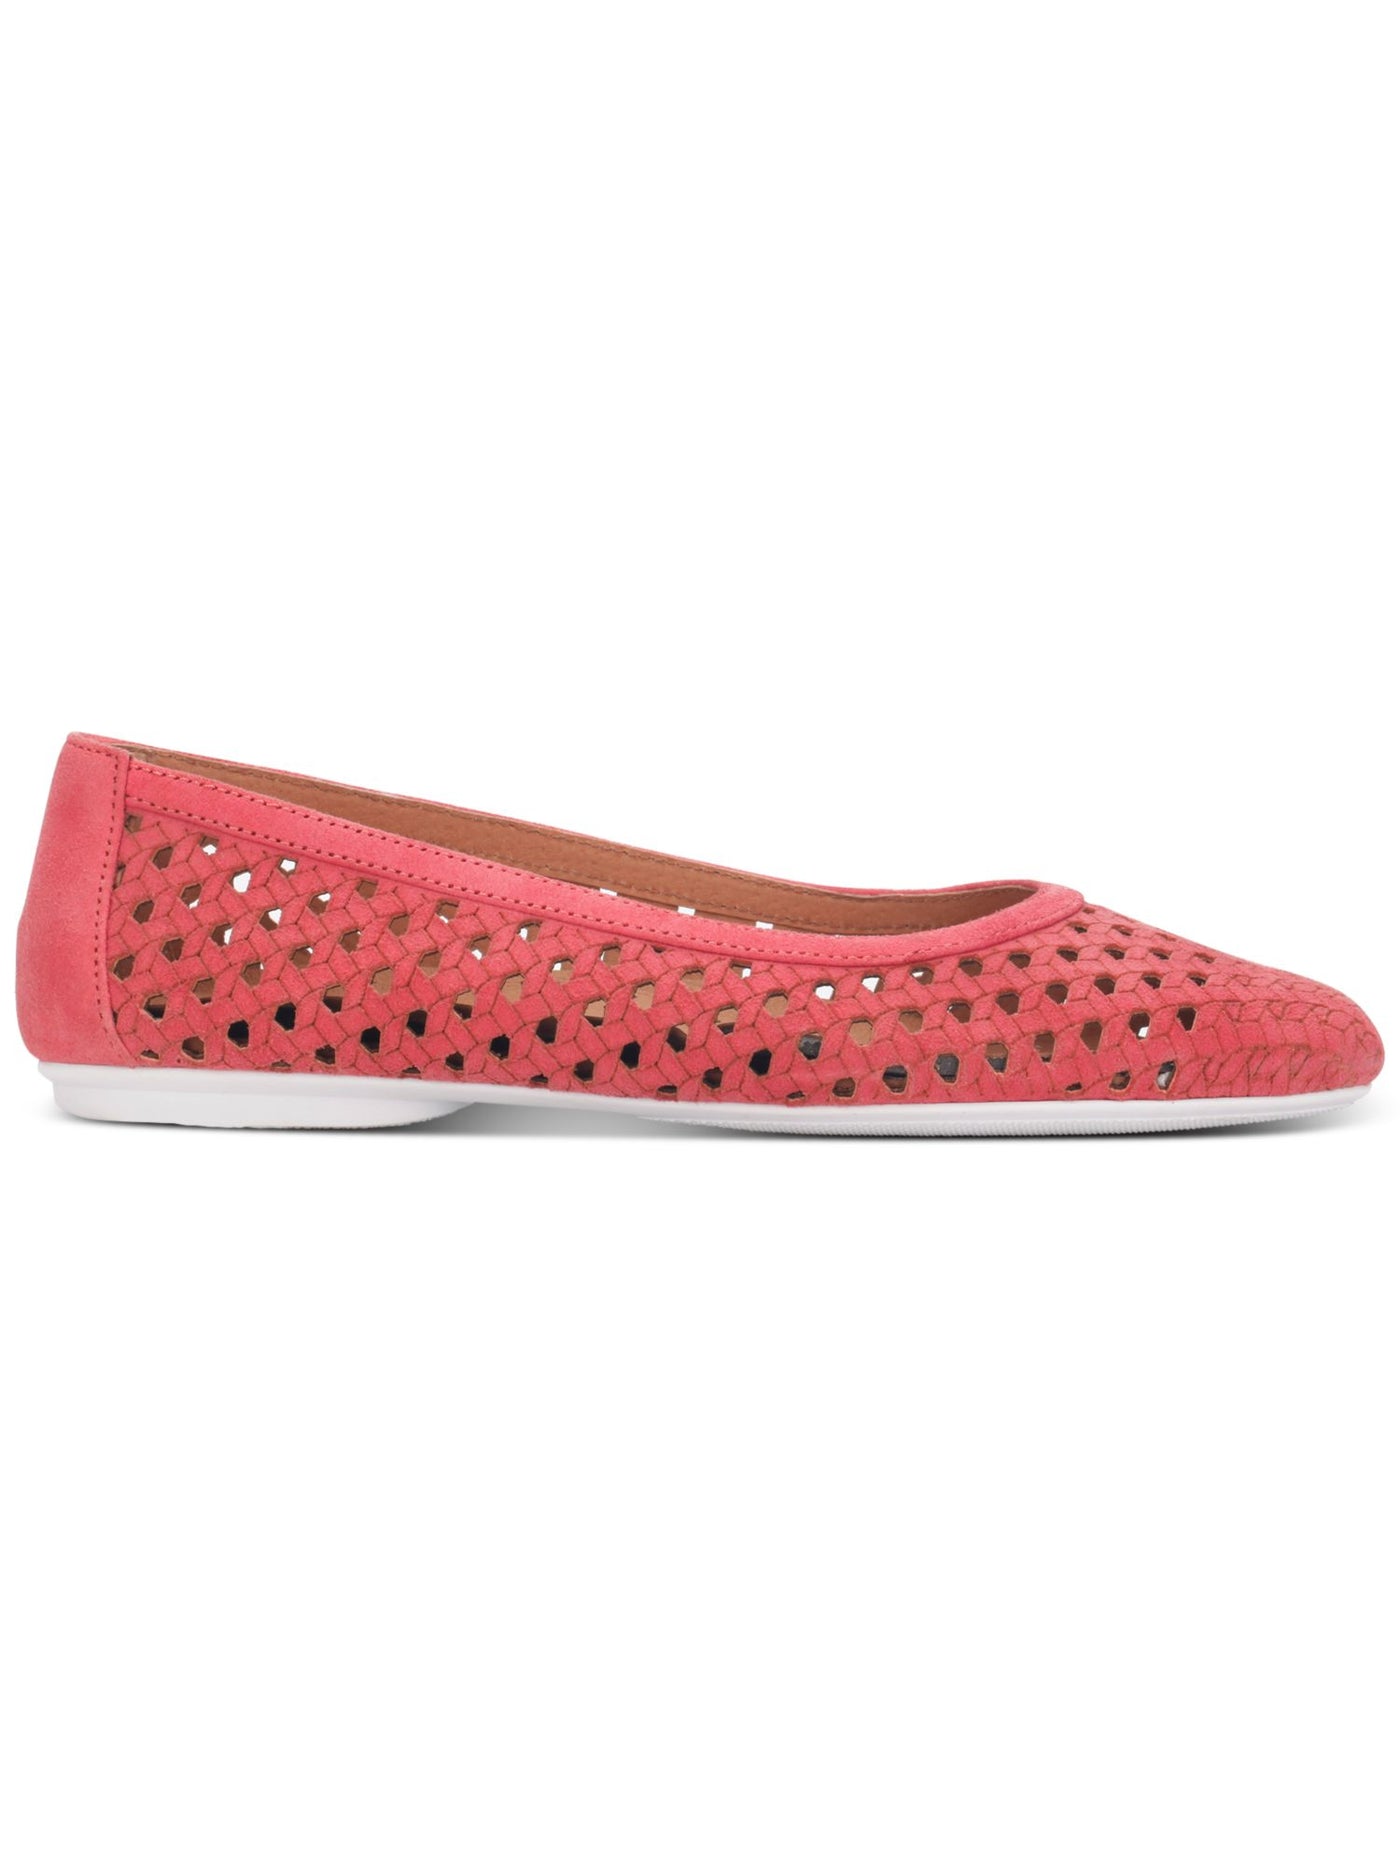 GENTLE SOULS KENNETH COLE Womens Coral Woven Cushioned Eugene Round Toe Slip On Leather Flats Shoes 9.5 M